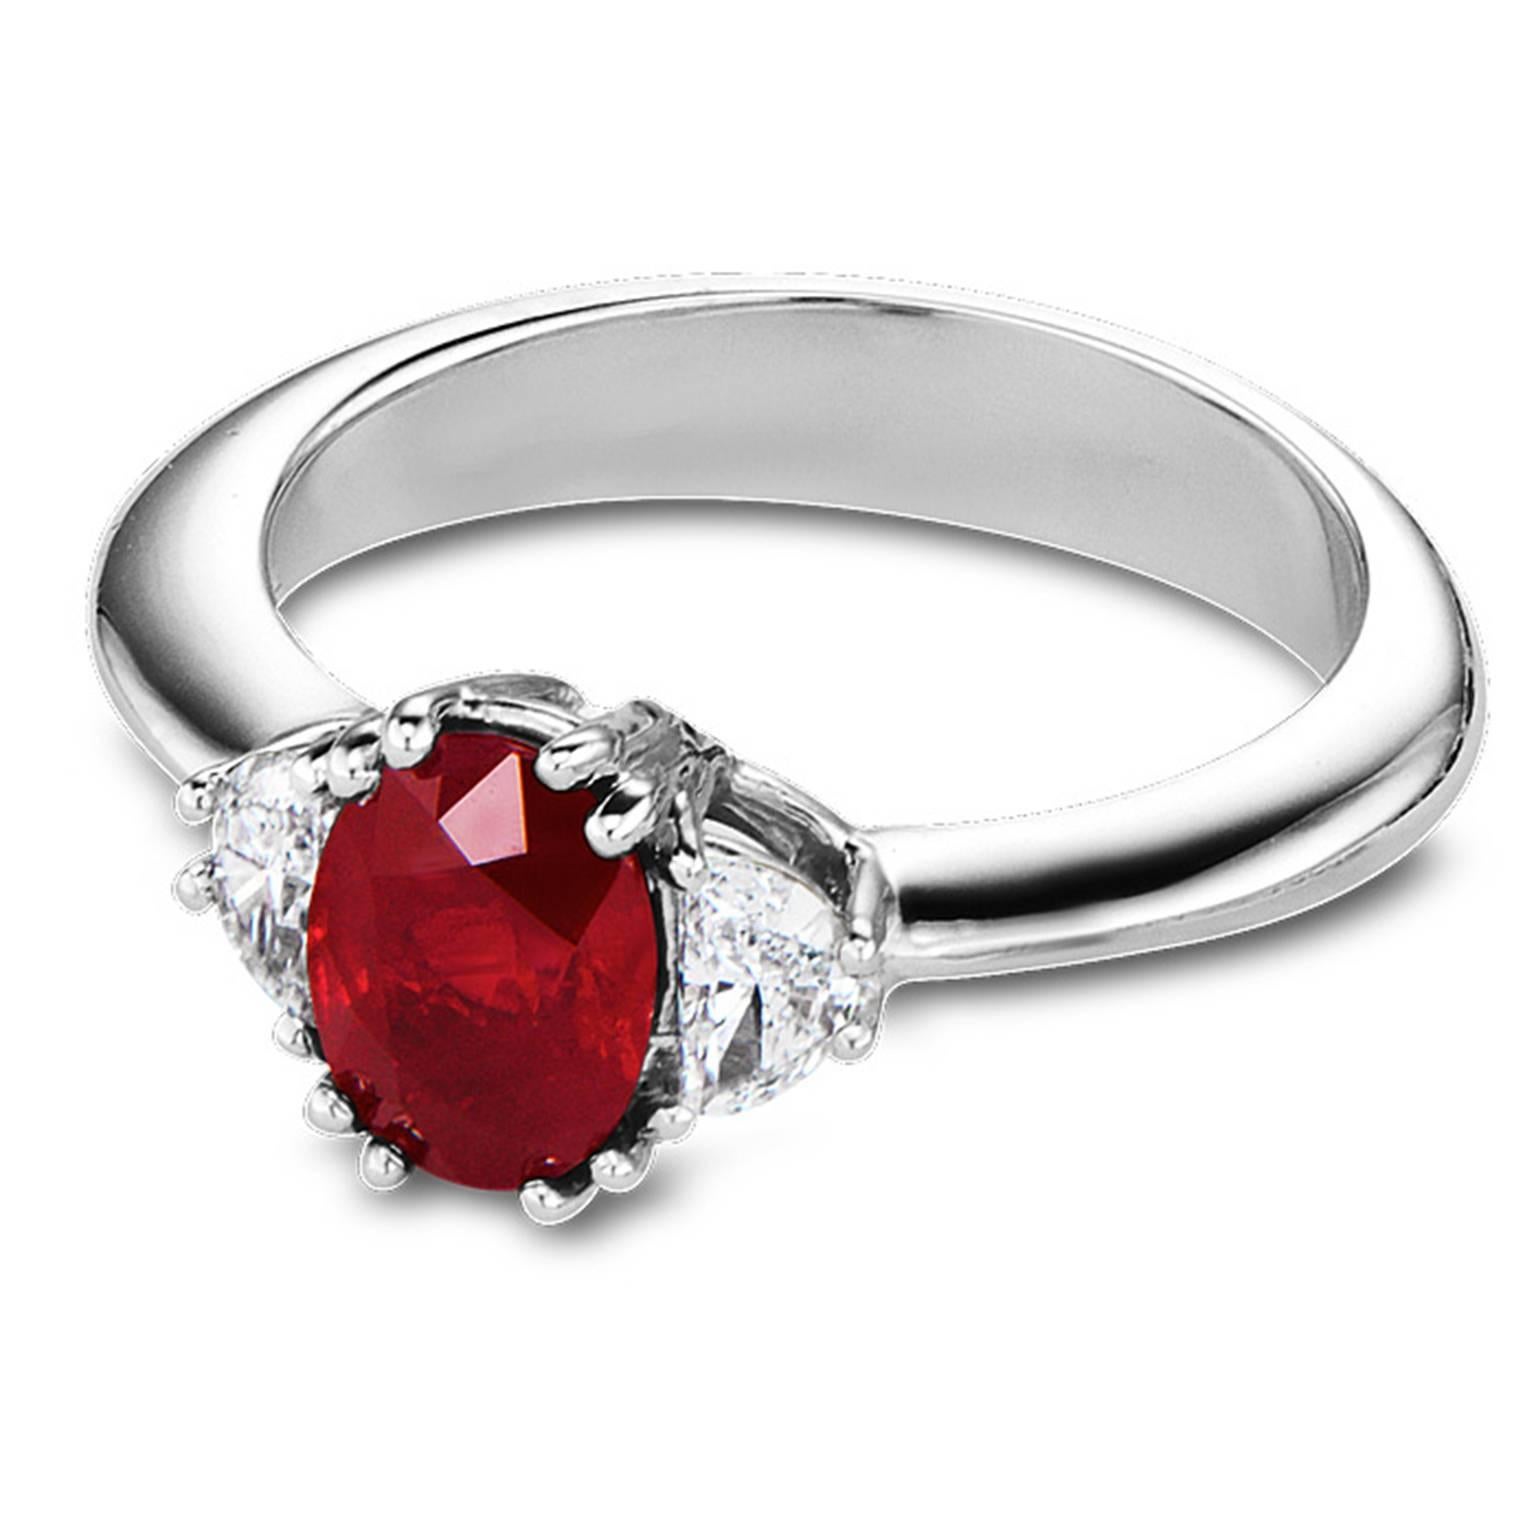 This exquisite ruby and diamond ring features an oval cut ruby weighing 1.15 carats having excellent color and cut, set between two half moon cut diamonds weighing 0.43 carats total, having VS2 clarity and G color. This timeless platinum ring is a